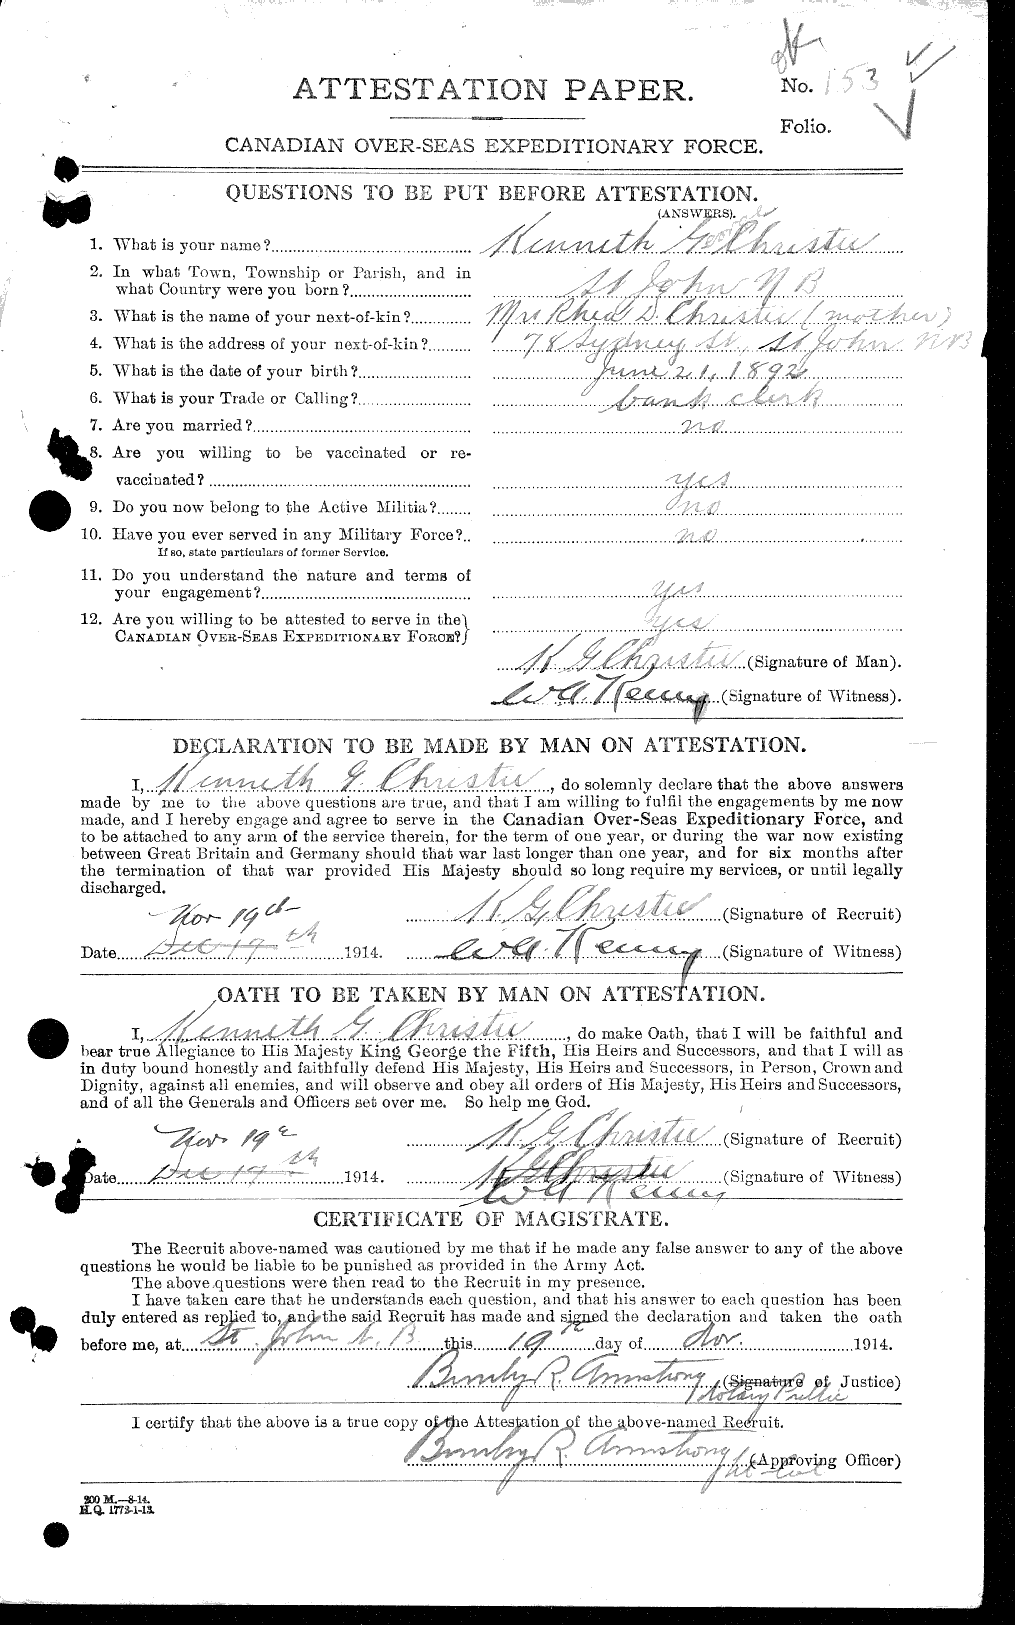 Personnel Records of the First World War - CEF 022021a